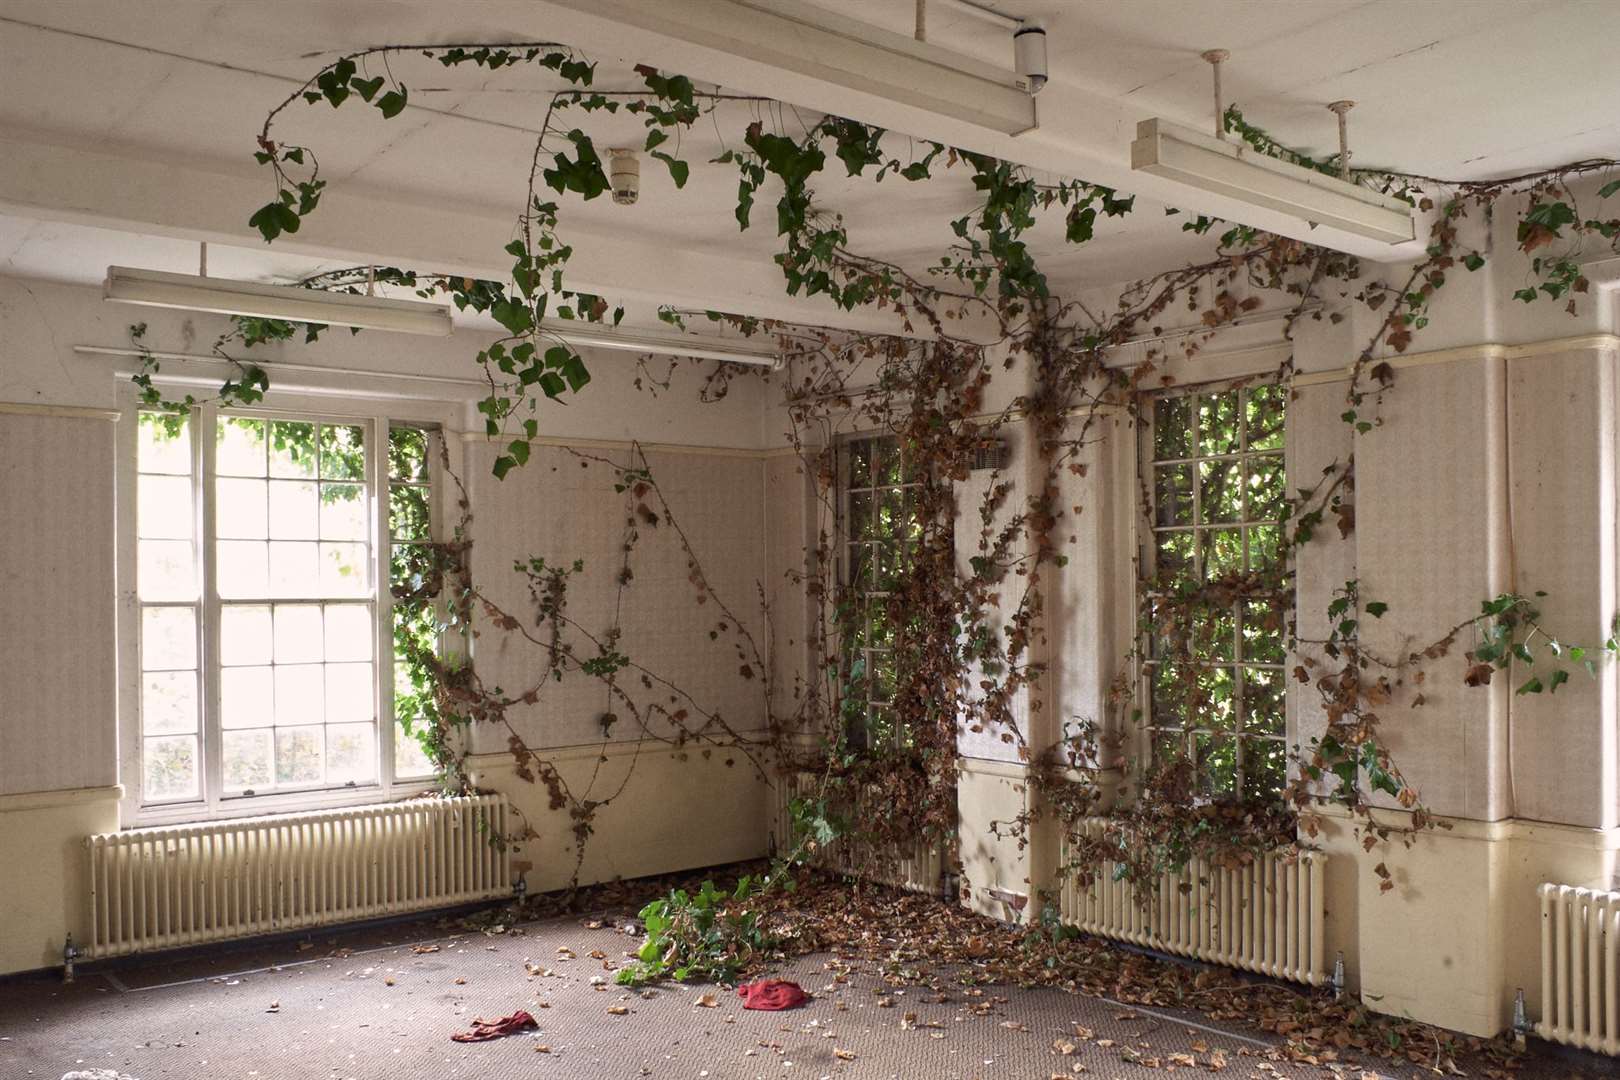 Vines creeping into the abandoned manor house in 2006